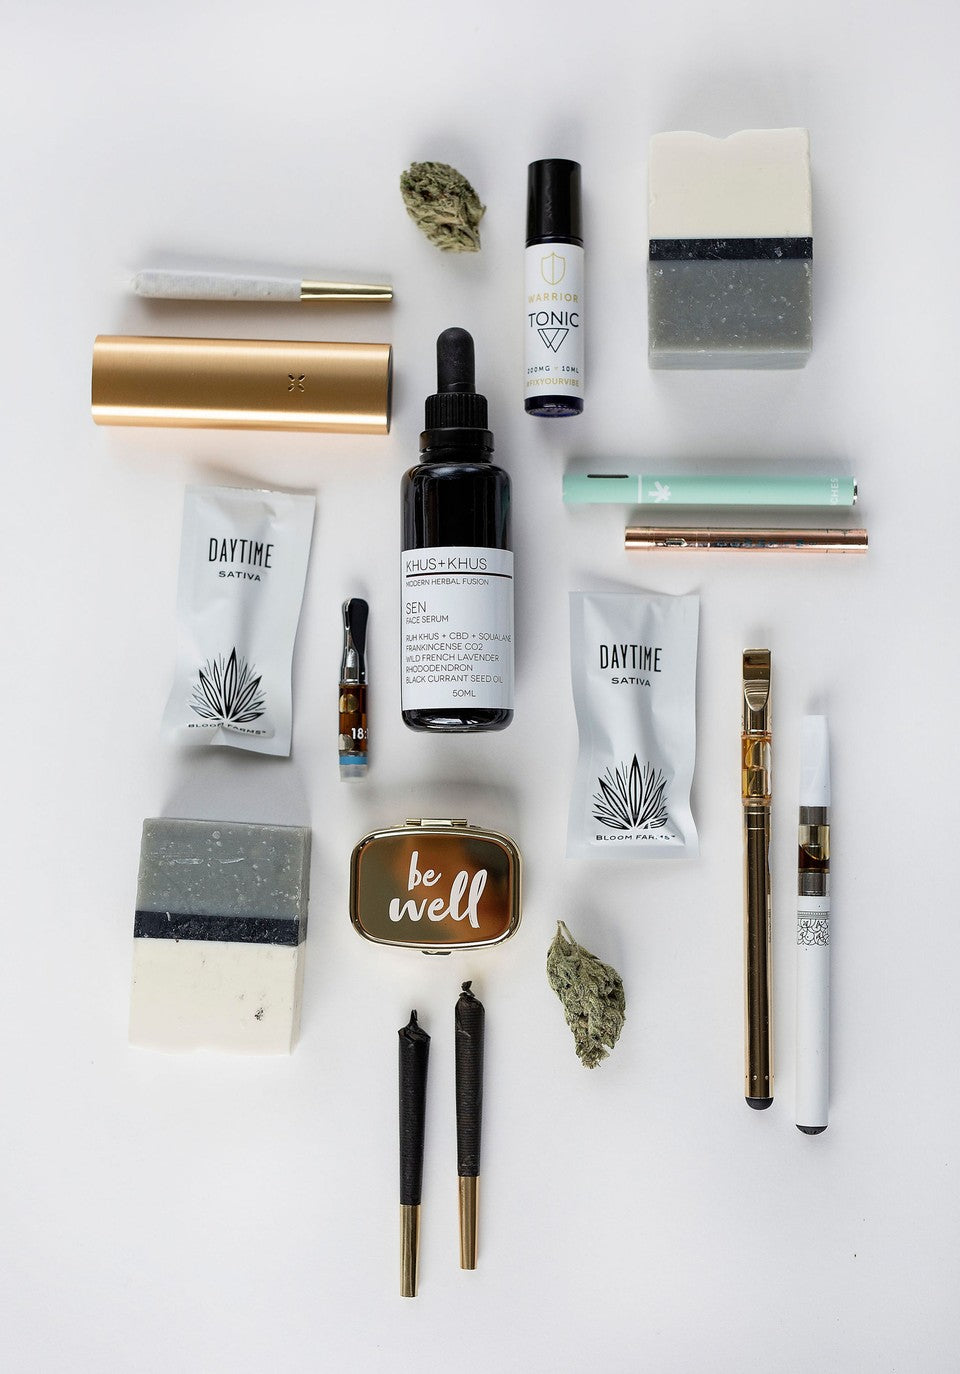 5 products every new cannabis user should try